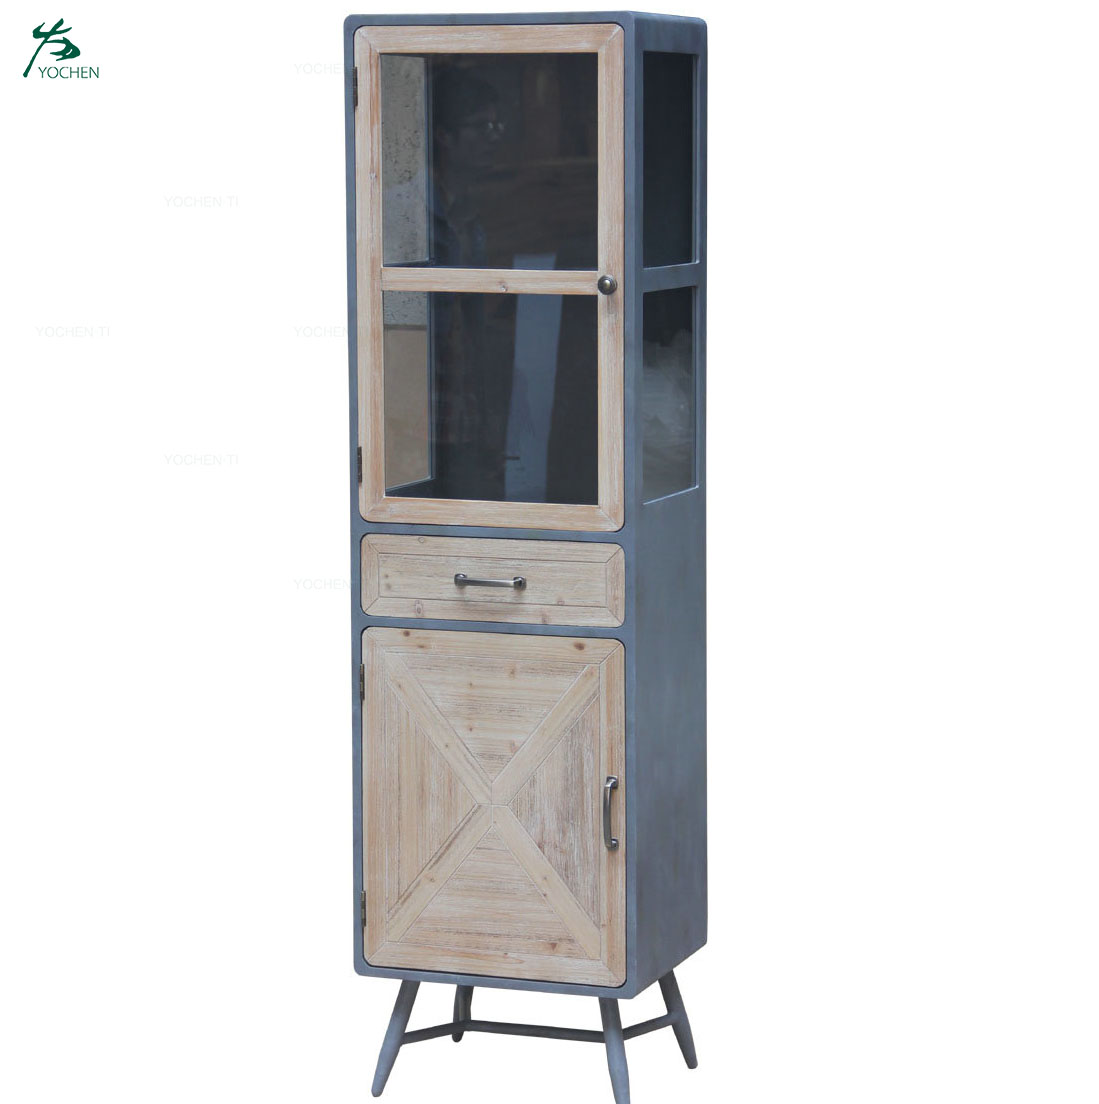 OEM customized low MOQ iron wooden french antique furniture